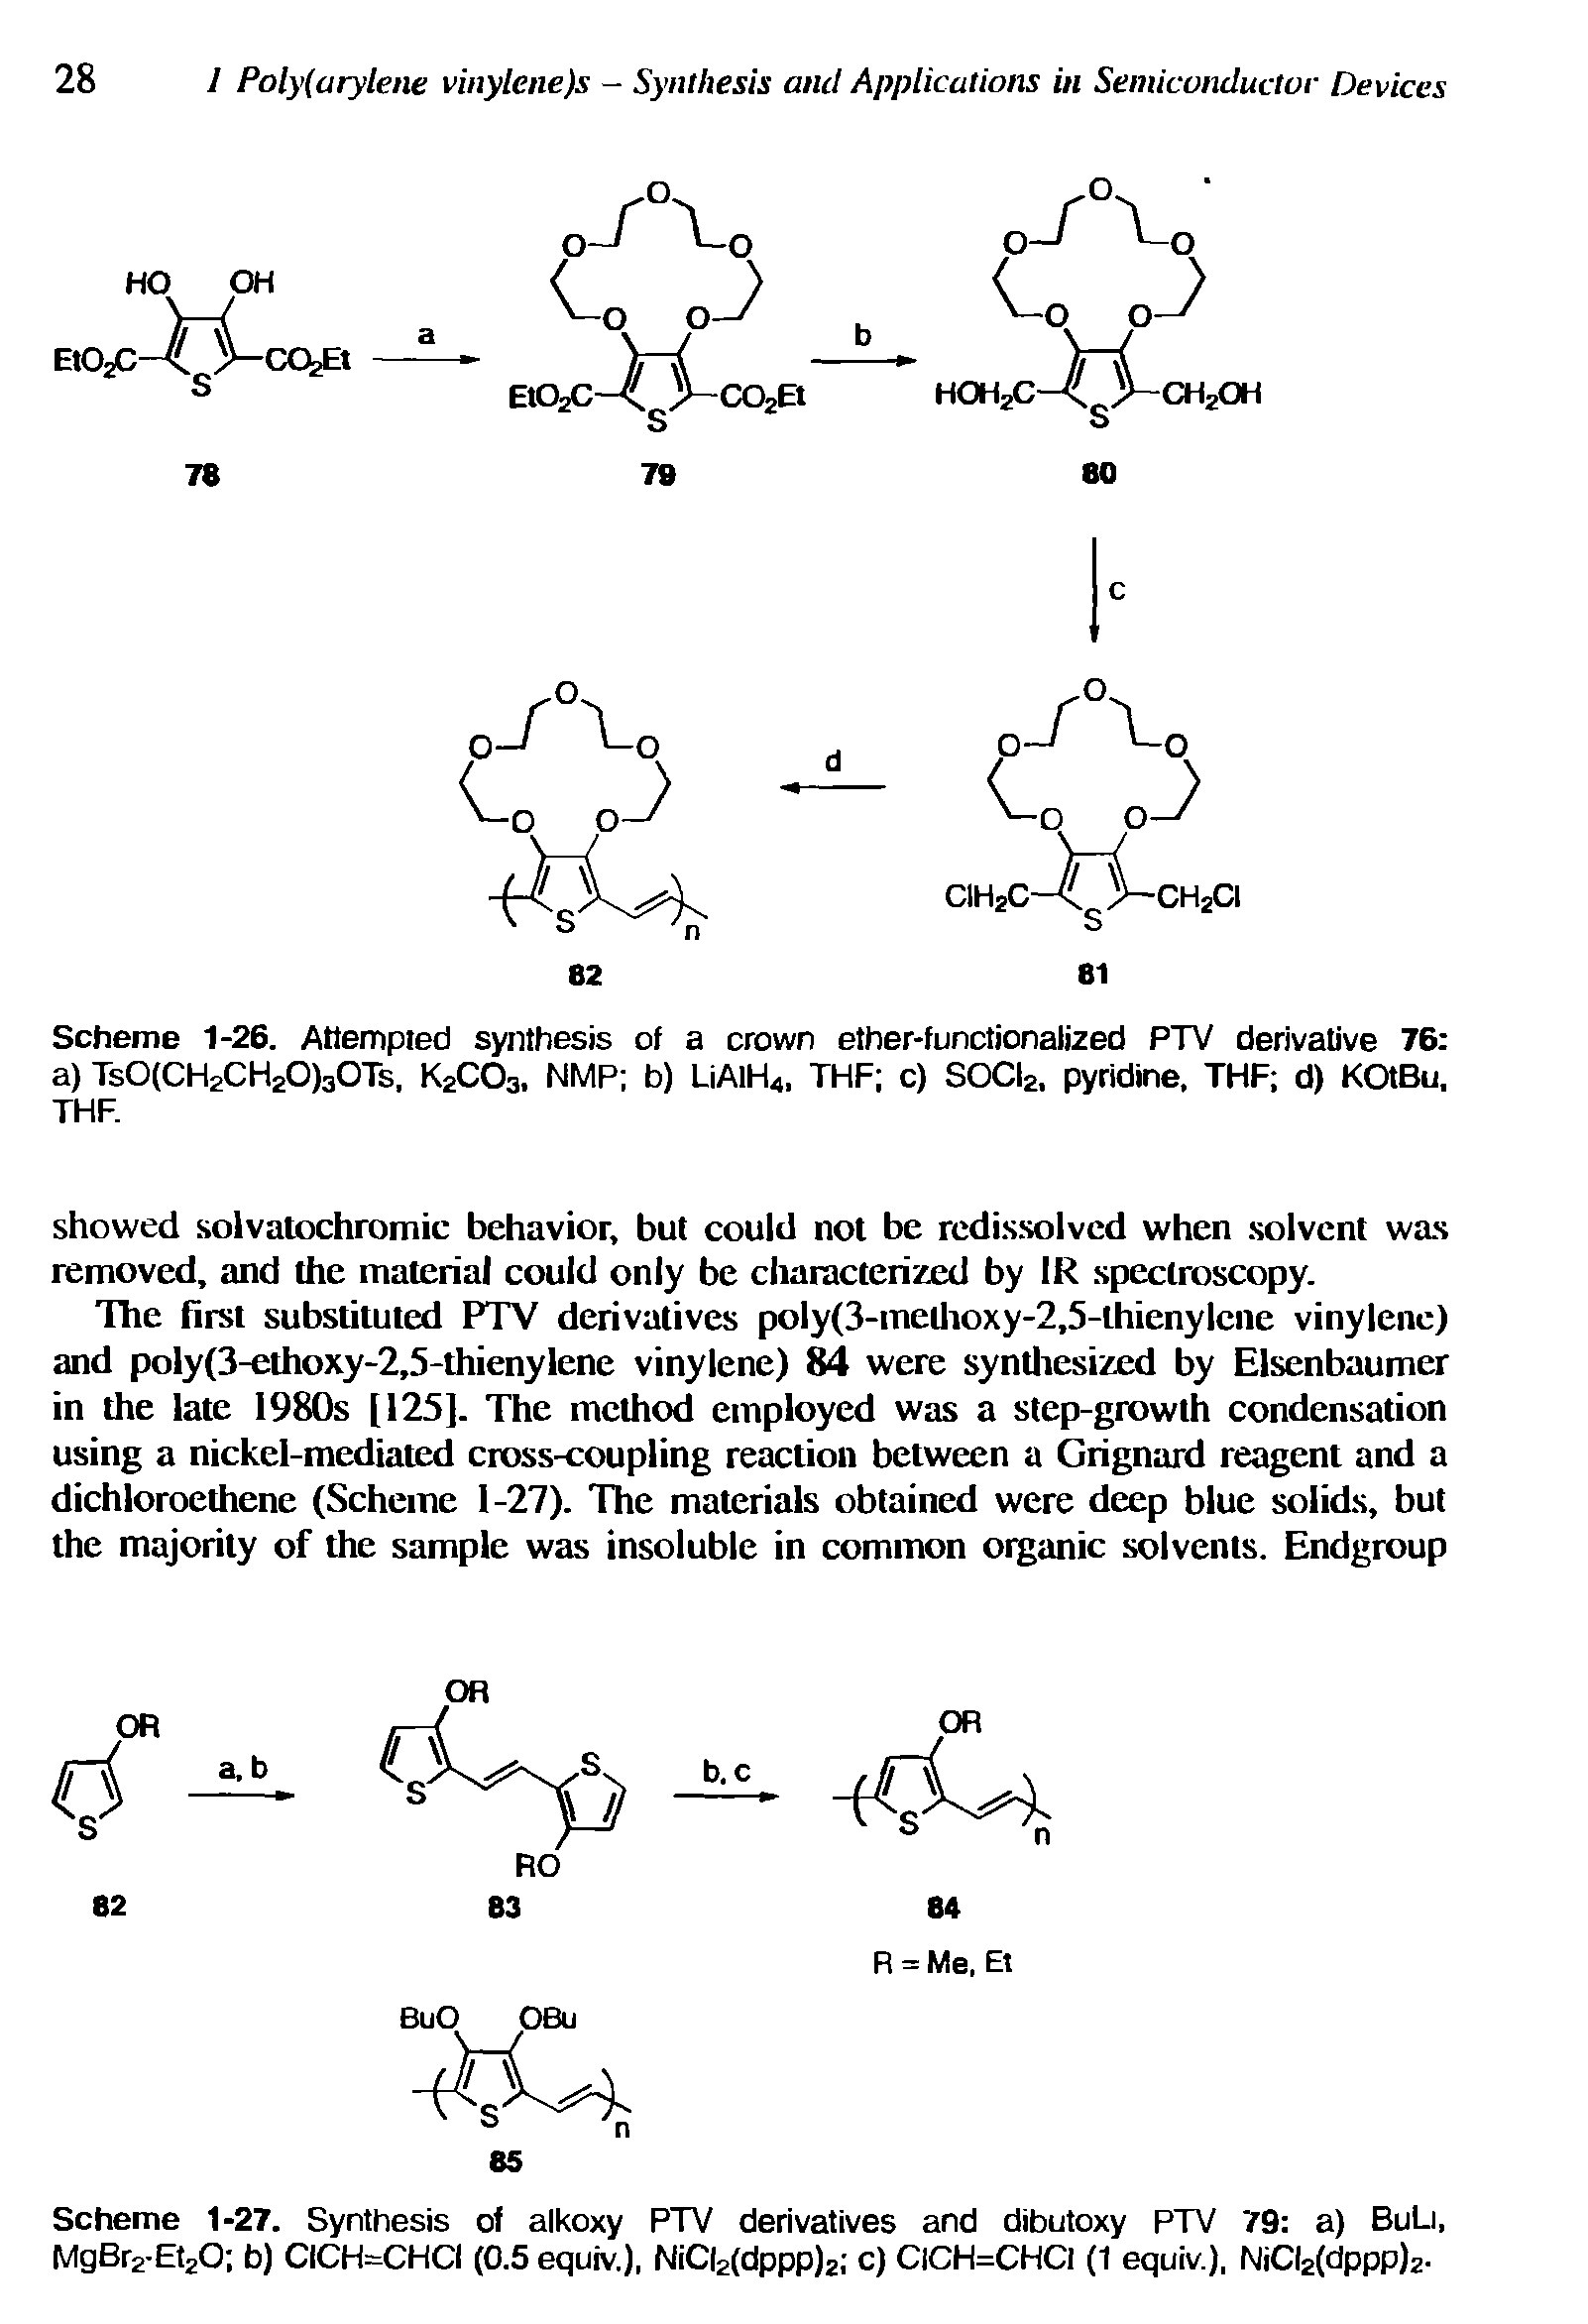 Scheme 1-26. Attempted synthesis of a crown ether-functionalized PTV derivative 76 a) TsO(CH2CH20)3OTs, K2C03i NMP b) LiAlH4, THF c) SOCI2, pyridine. THF d) KOtBu. THF.